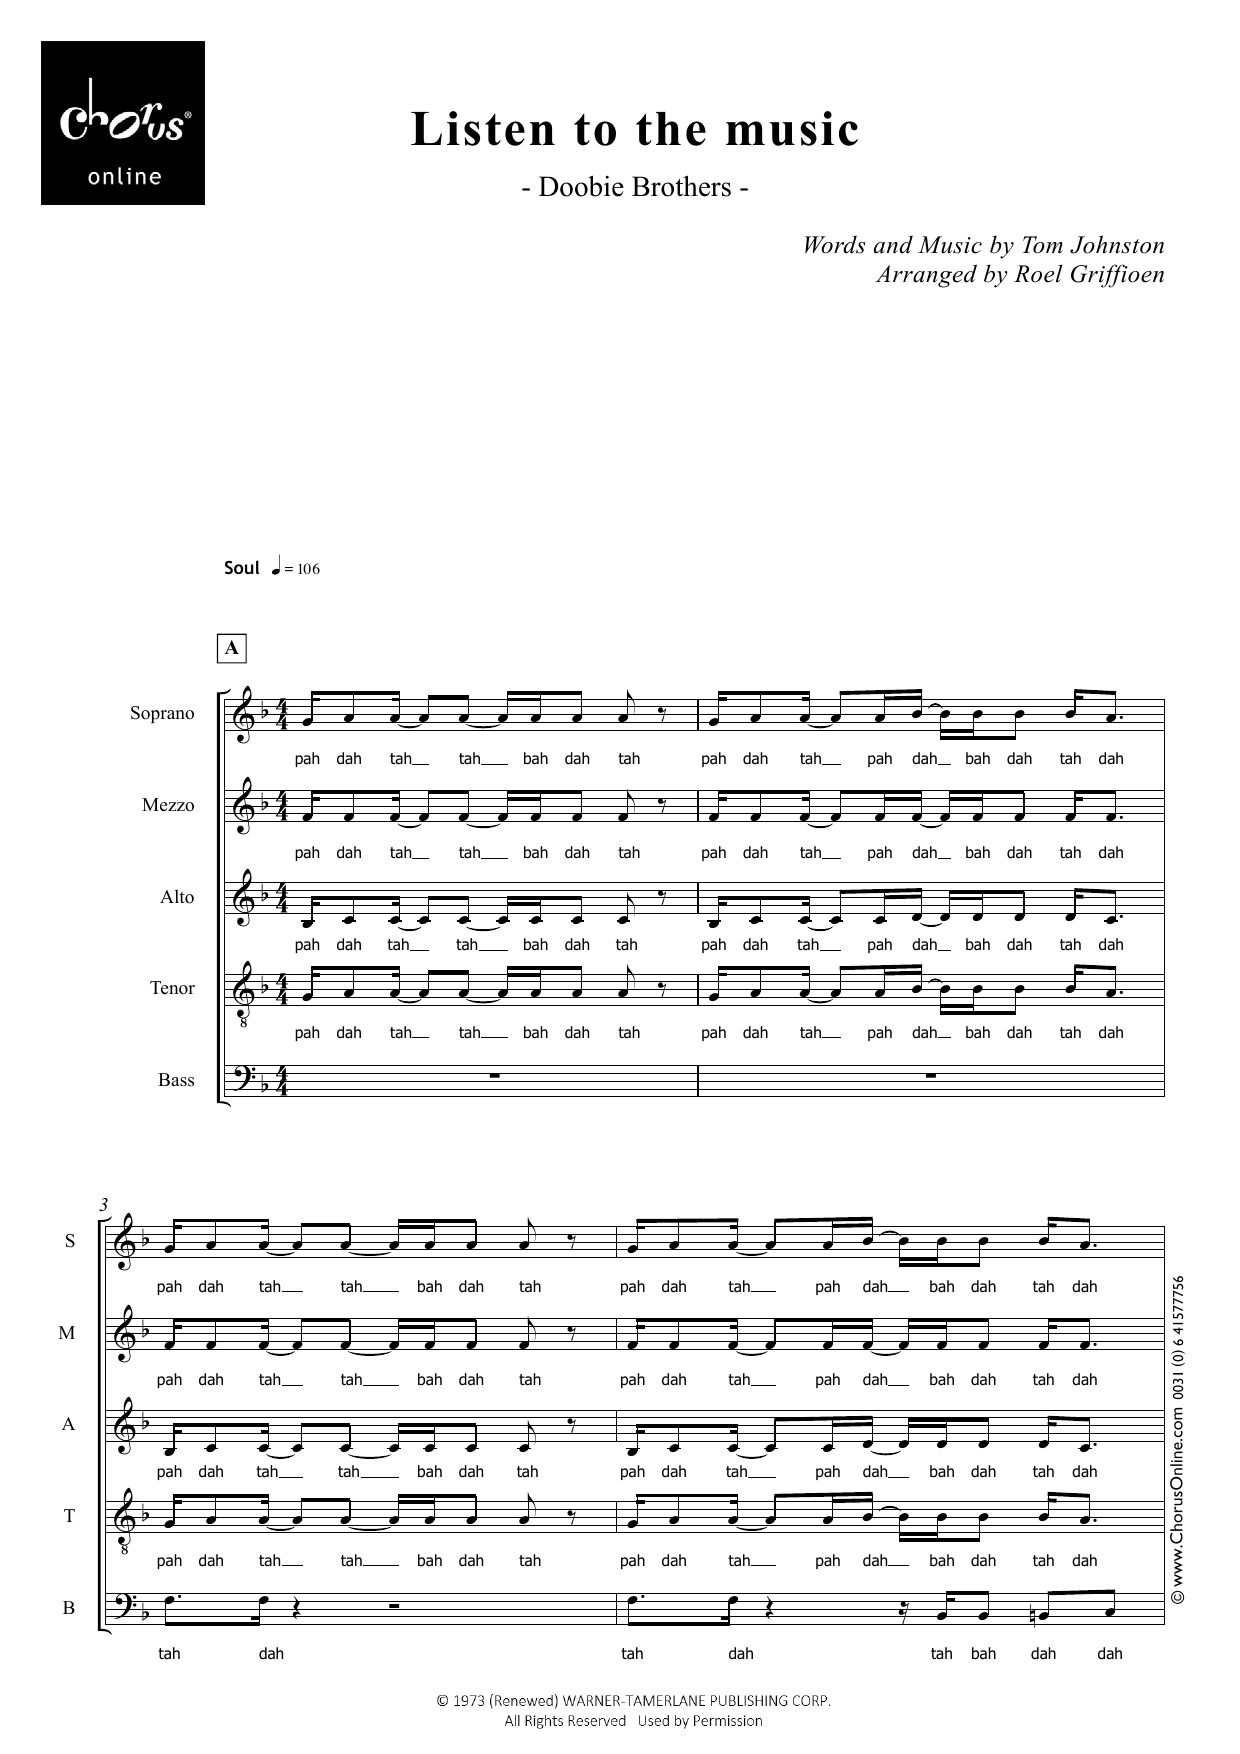 The Doobie Brothers Listen to the Music (arr. Roel Griffioen) sheet music notes printable PDF score